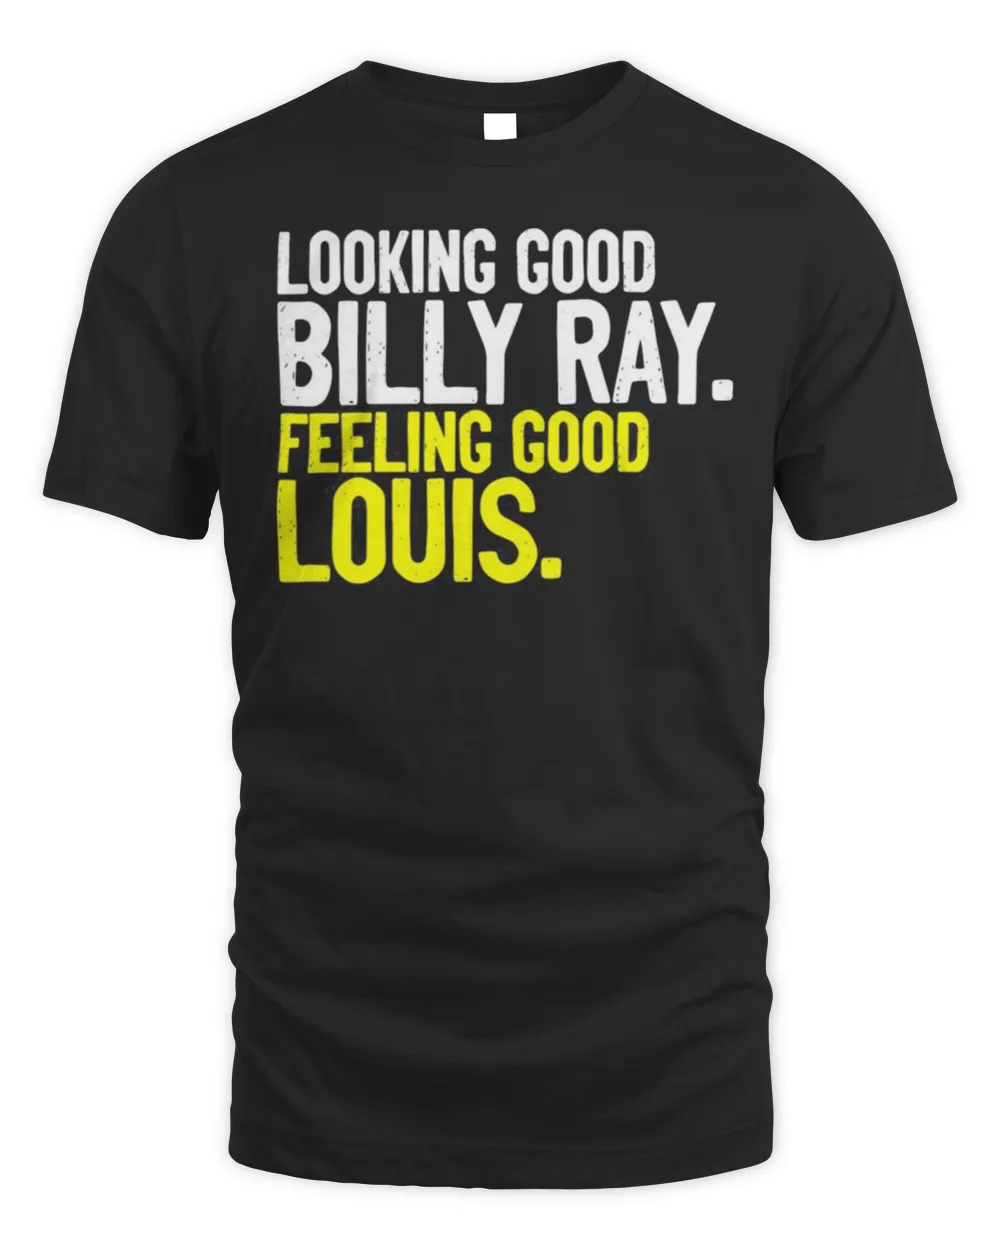 Looking Good Billy Ray Feeling Good Louis Trading Places T-shirt Unisex Standard T-Shirt black xl